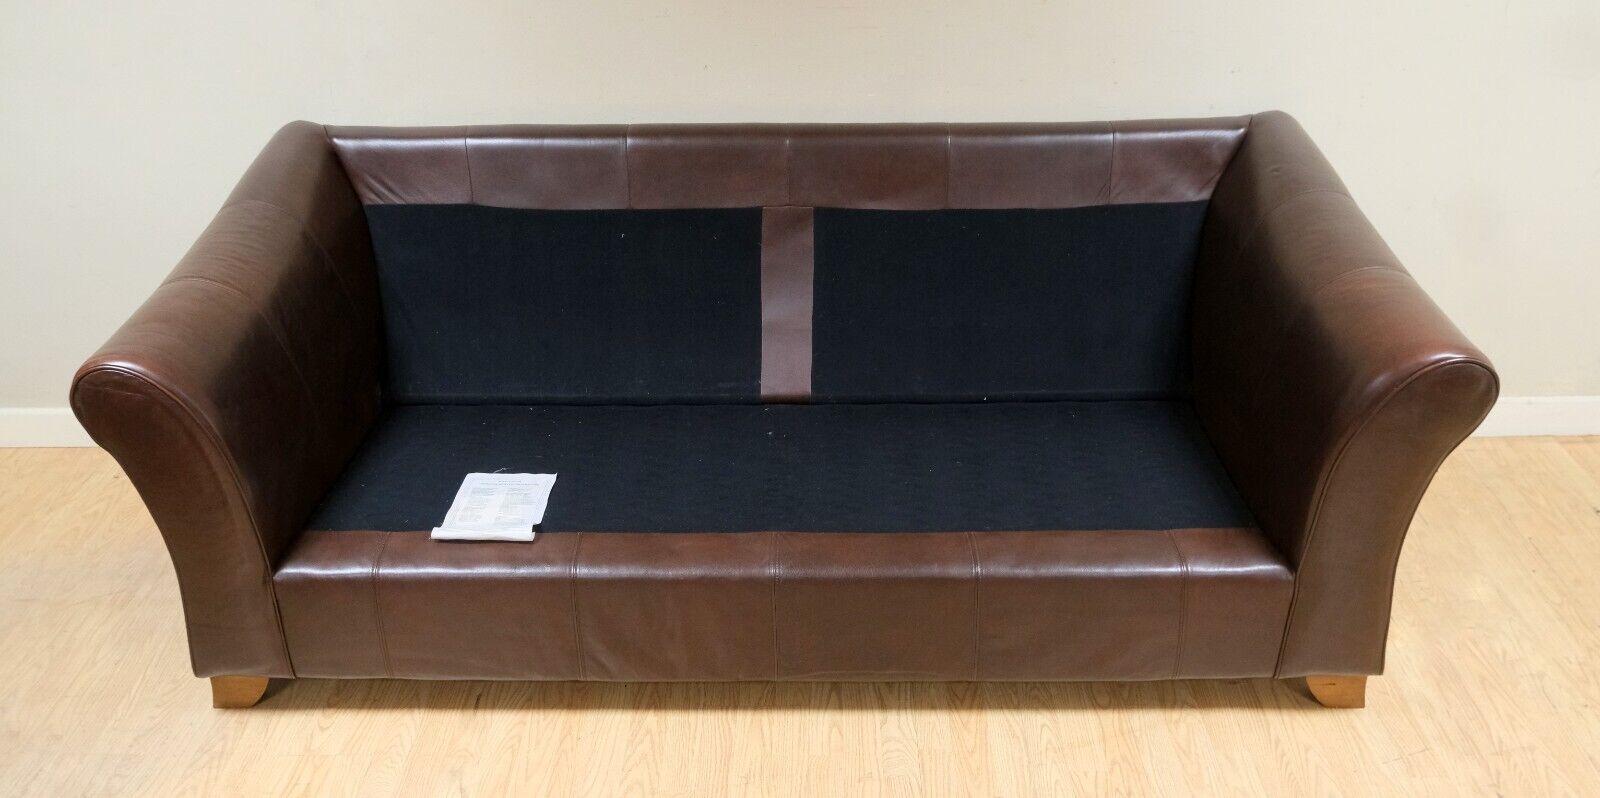 LOVELY MARKS & SPENCER ABBEY BRoWN LEATHER TWO SEATER SOFA ON WOODEN FEET For Sale 5